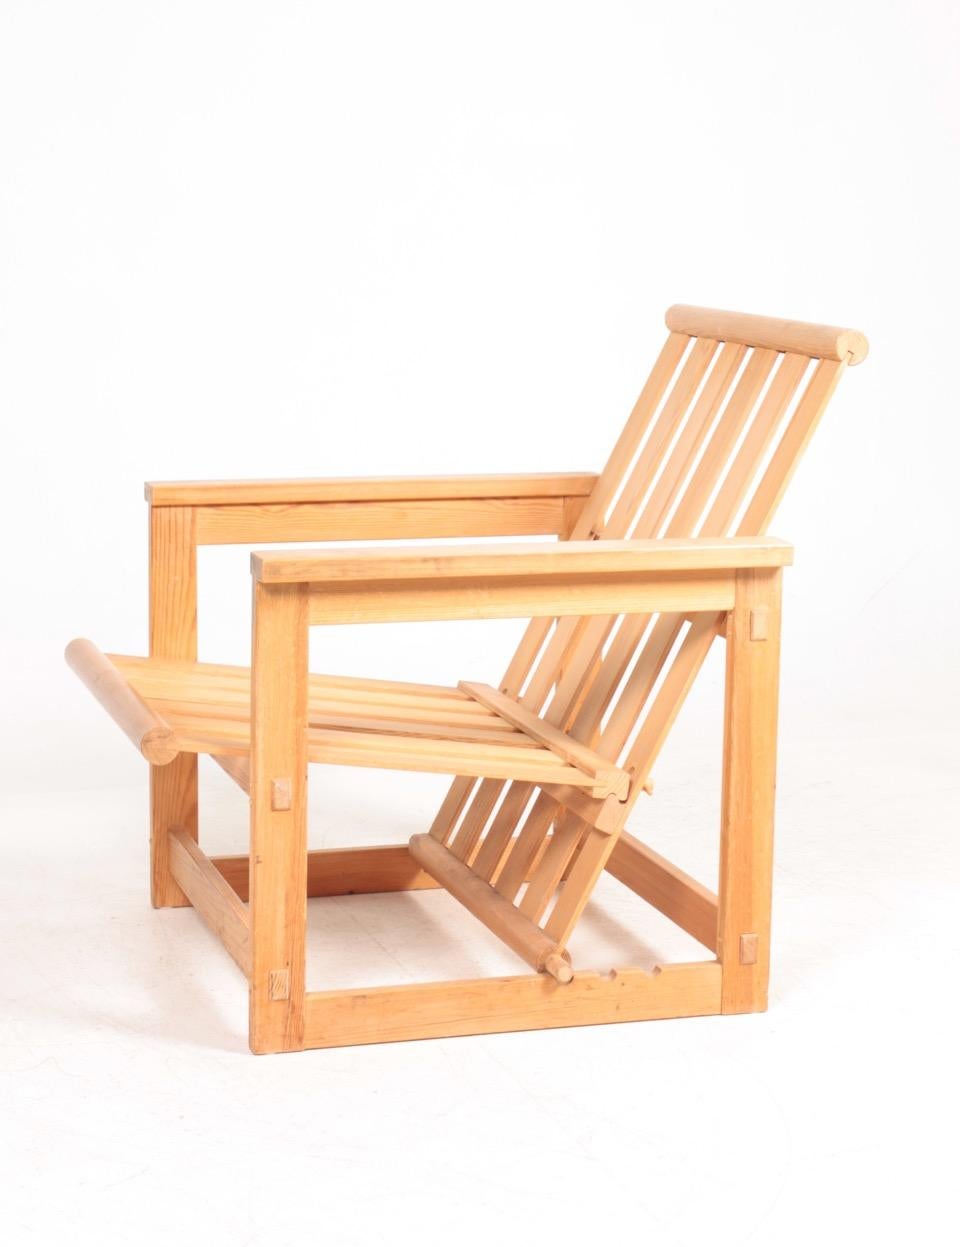 Lounge chair in solid pine designed by Edvin Helseth for Trybo furniture. Made in Norway. Great original condition.